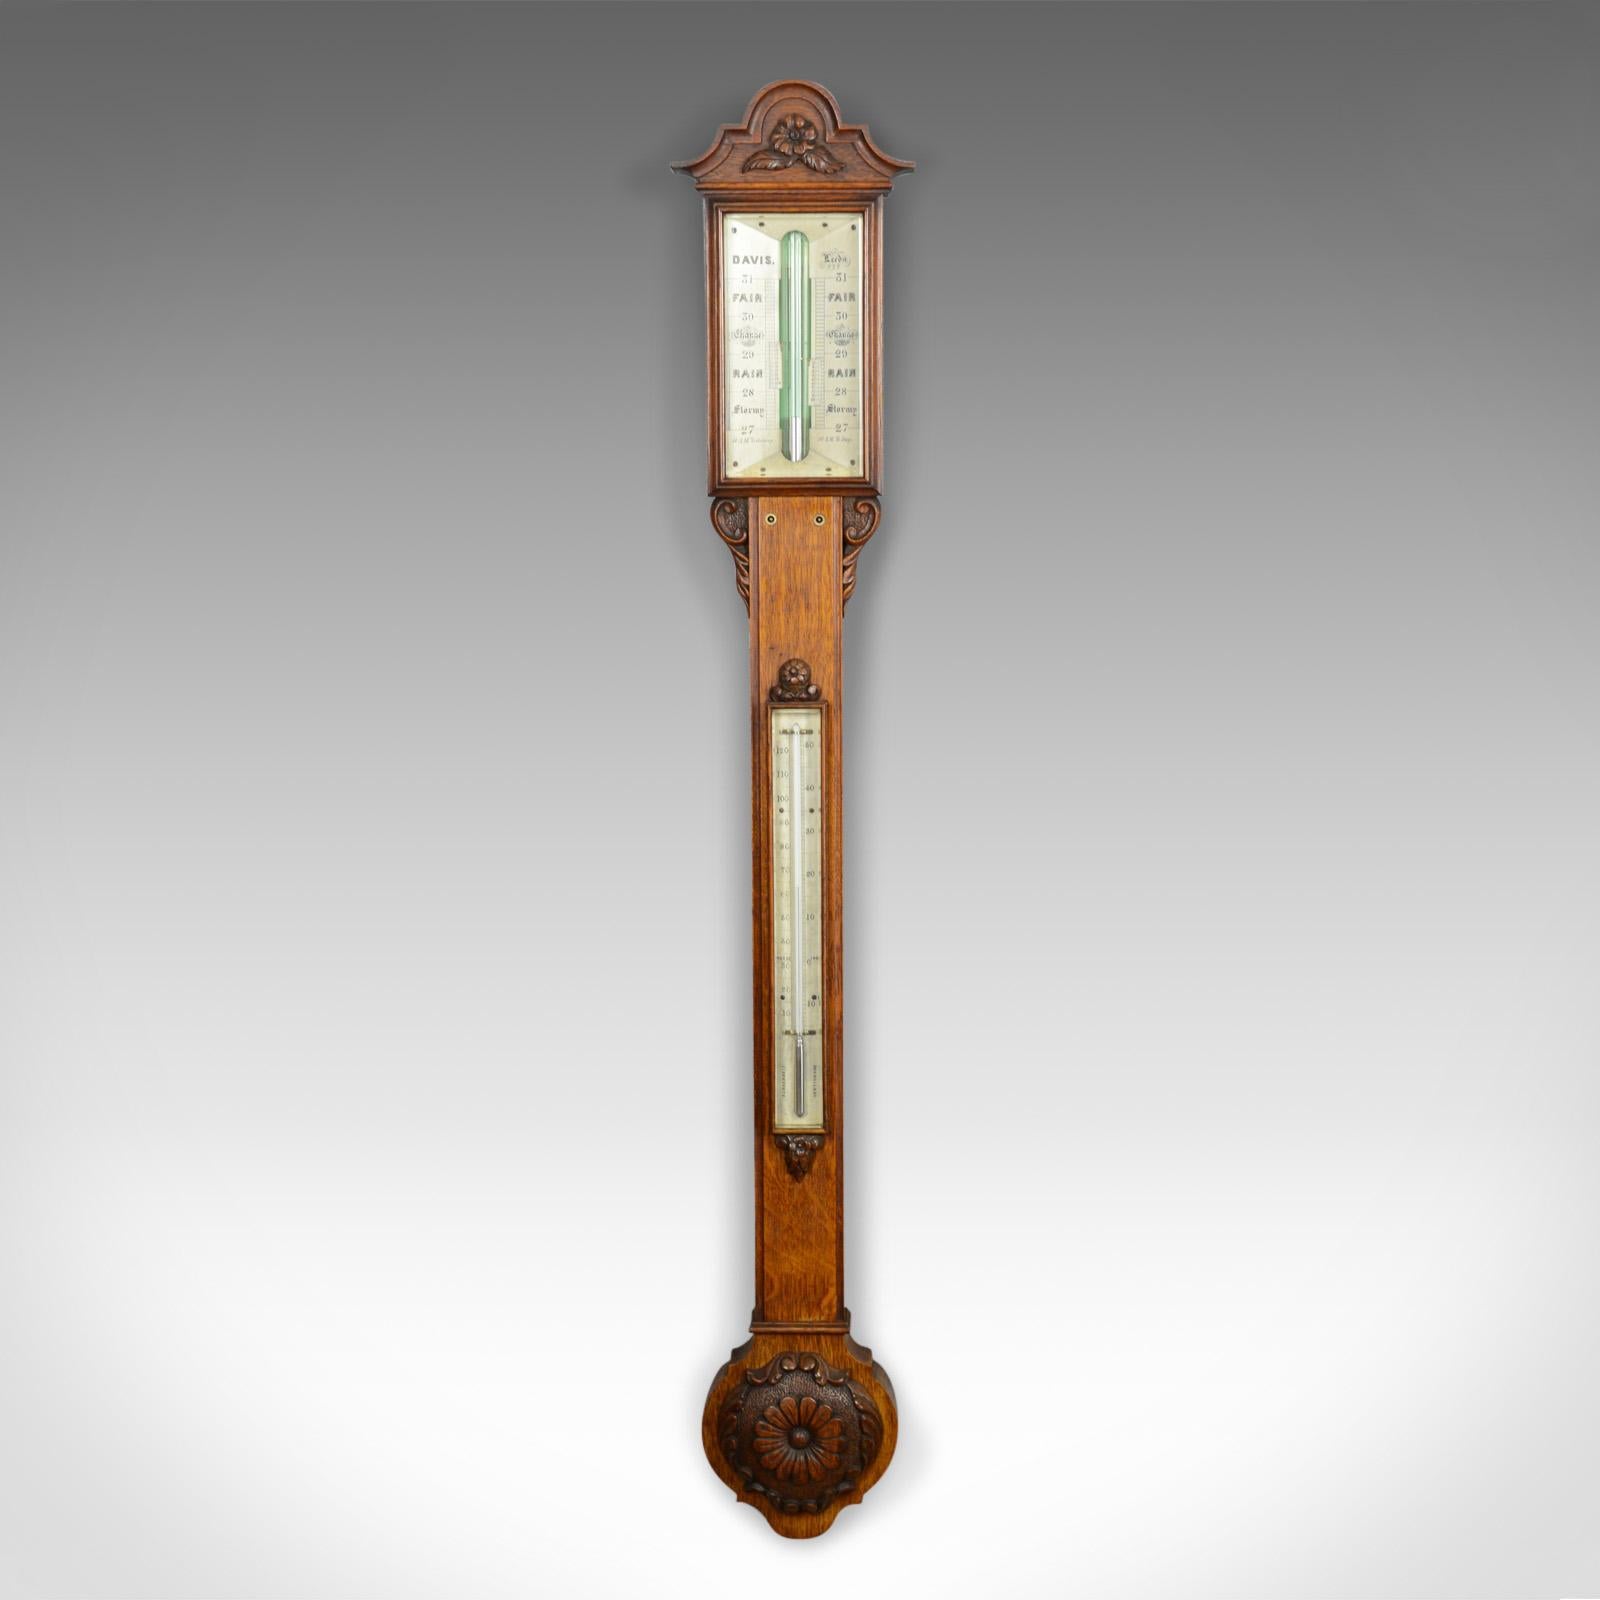 This is an antique stick barometer by Davis of Leeds. English, oak and dating to the early 19th century, circa 1830.

Of fine quality by renowned maker, Davis of Leeds
Cased in English oak displaying grain interest and a desirable patina
Bright,